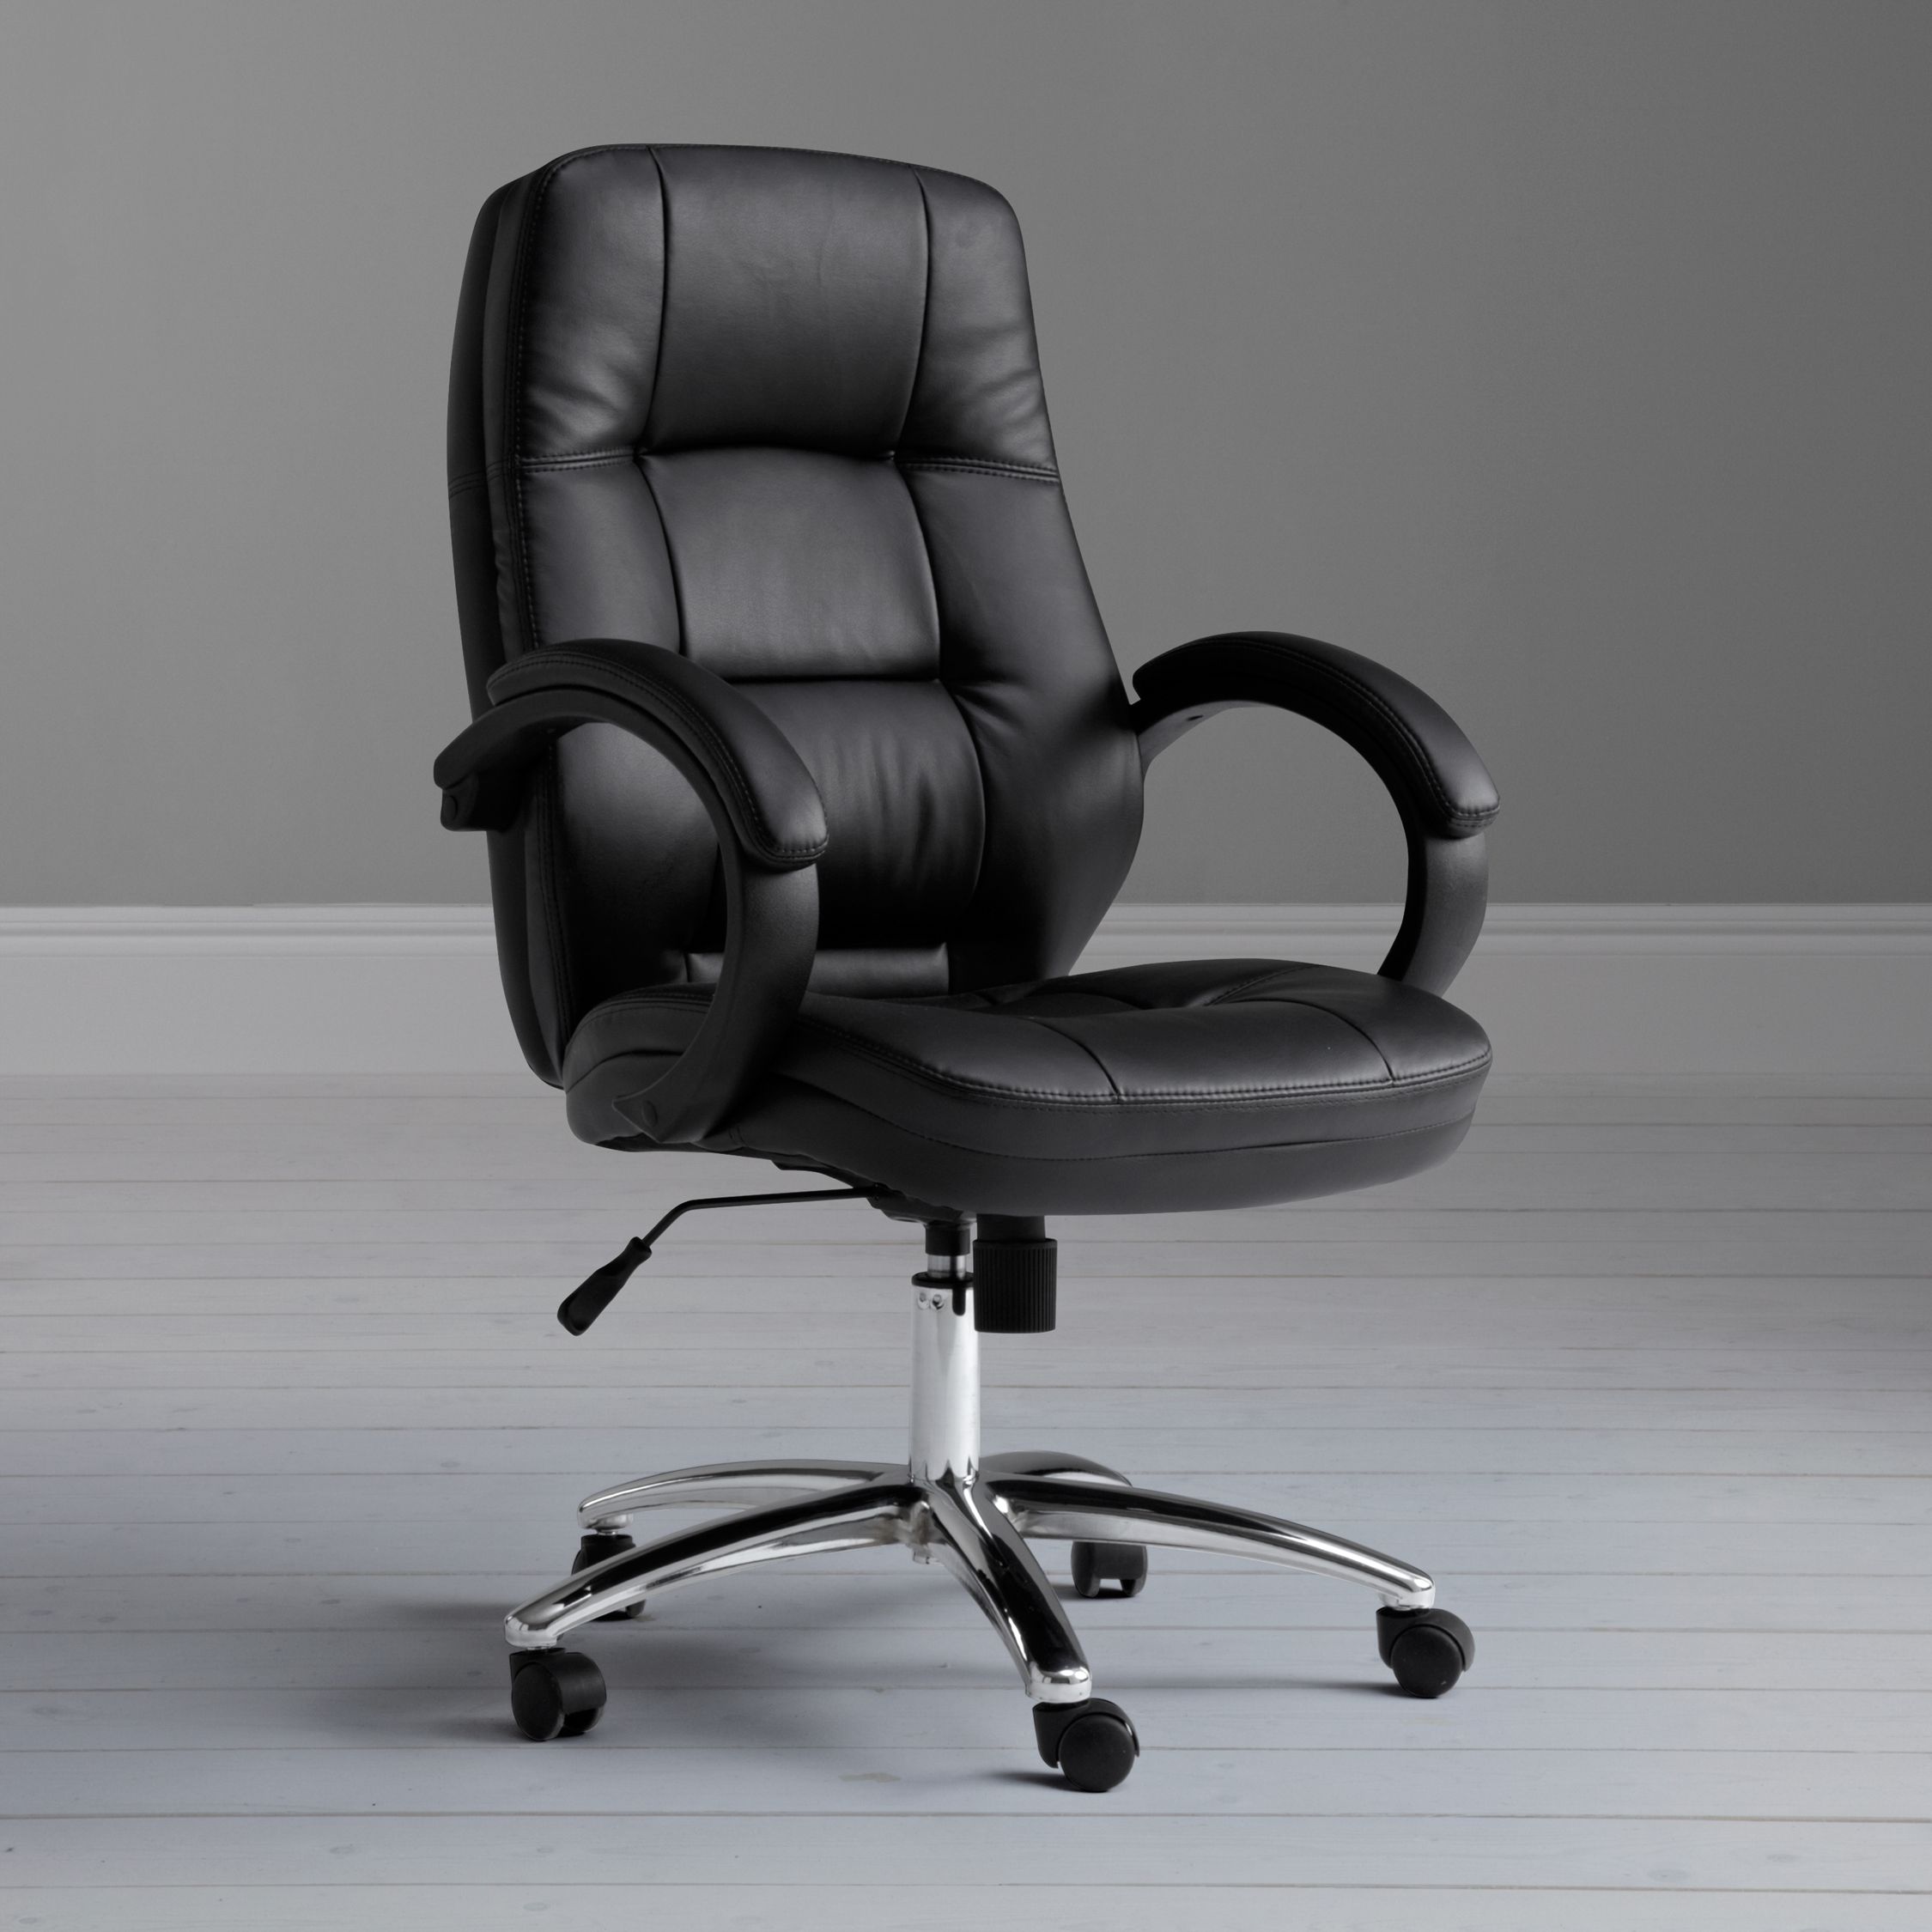 John Lewis Classic Leather Office Chair